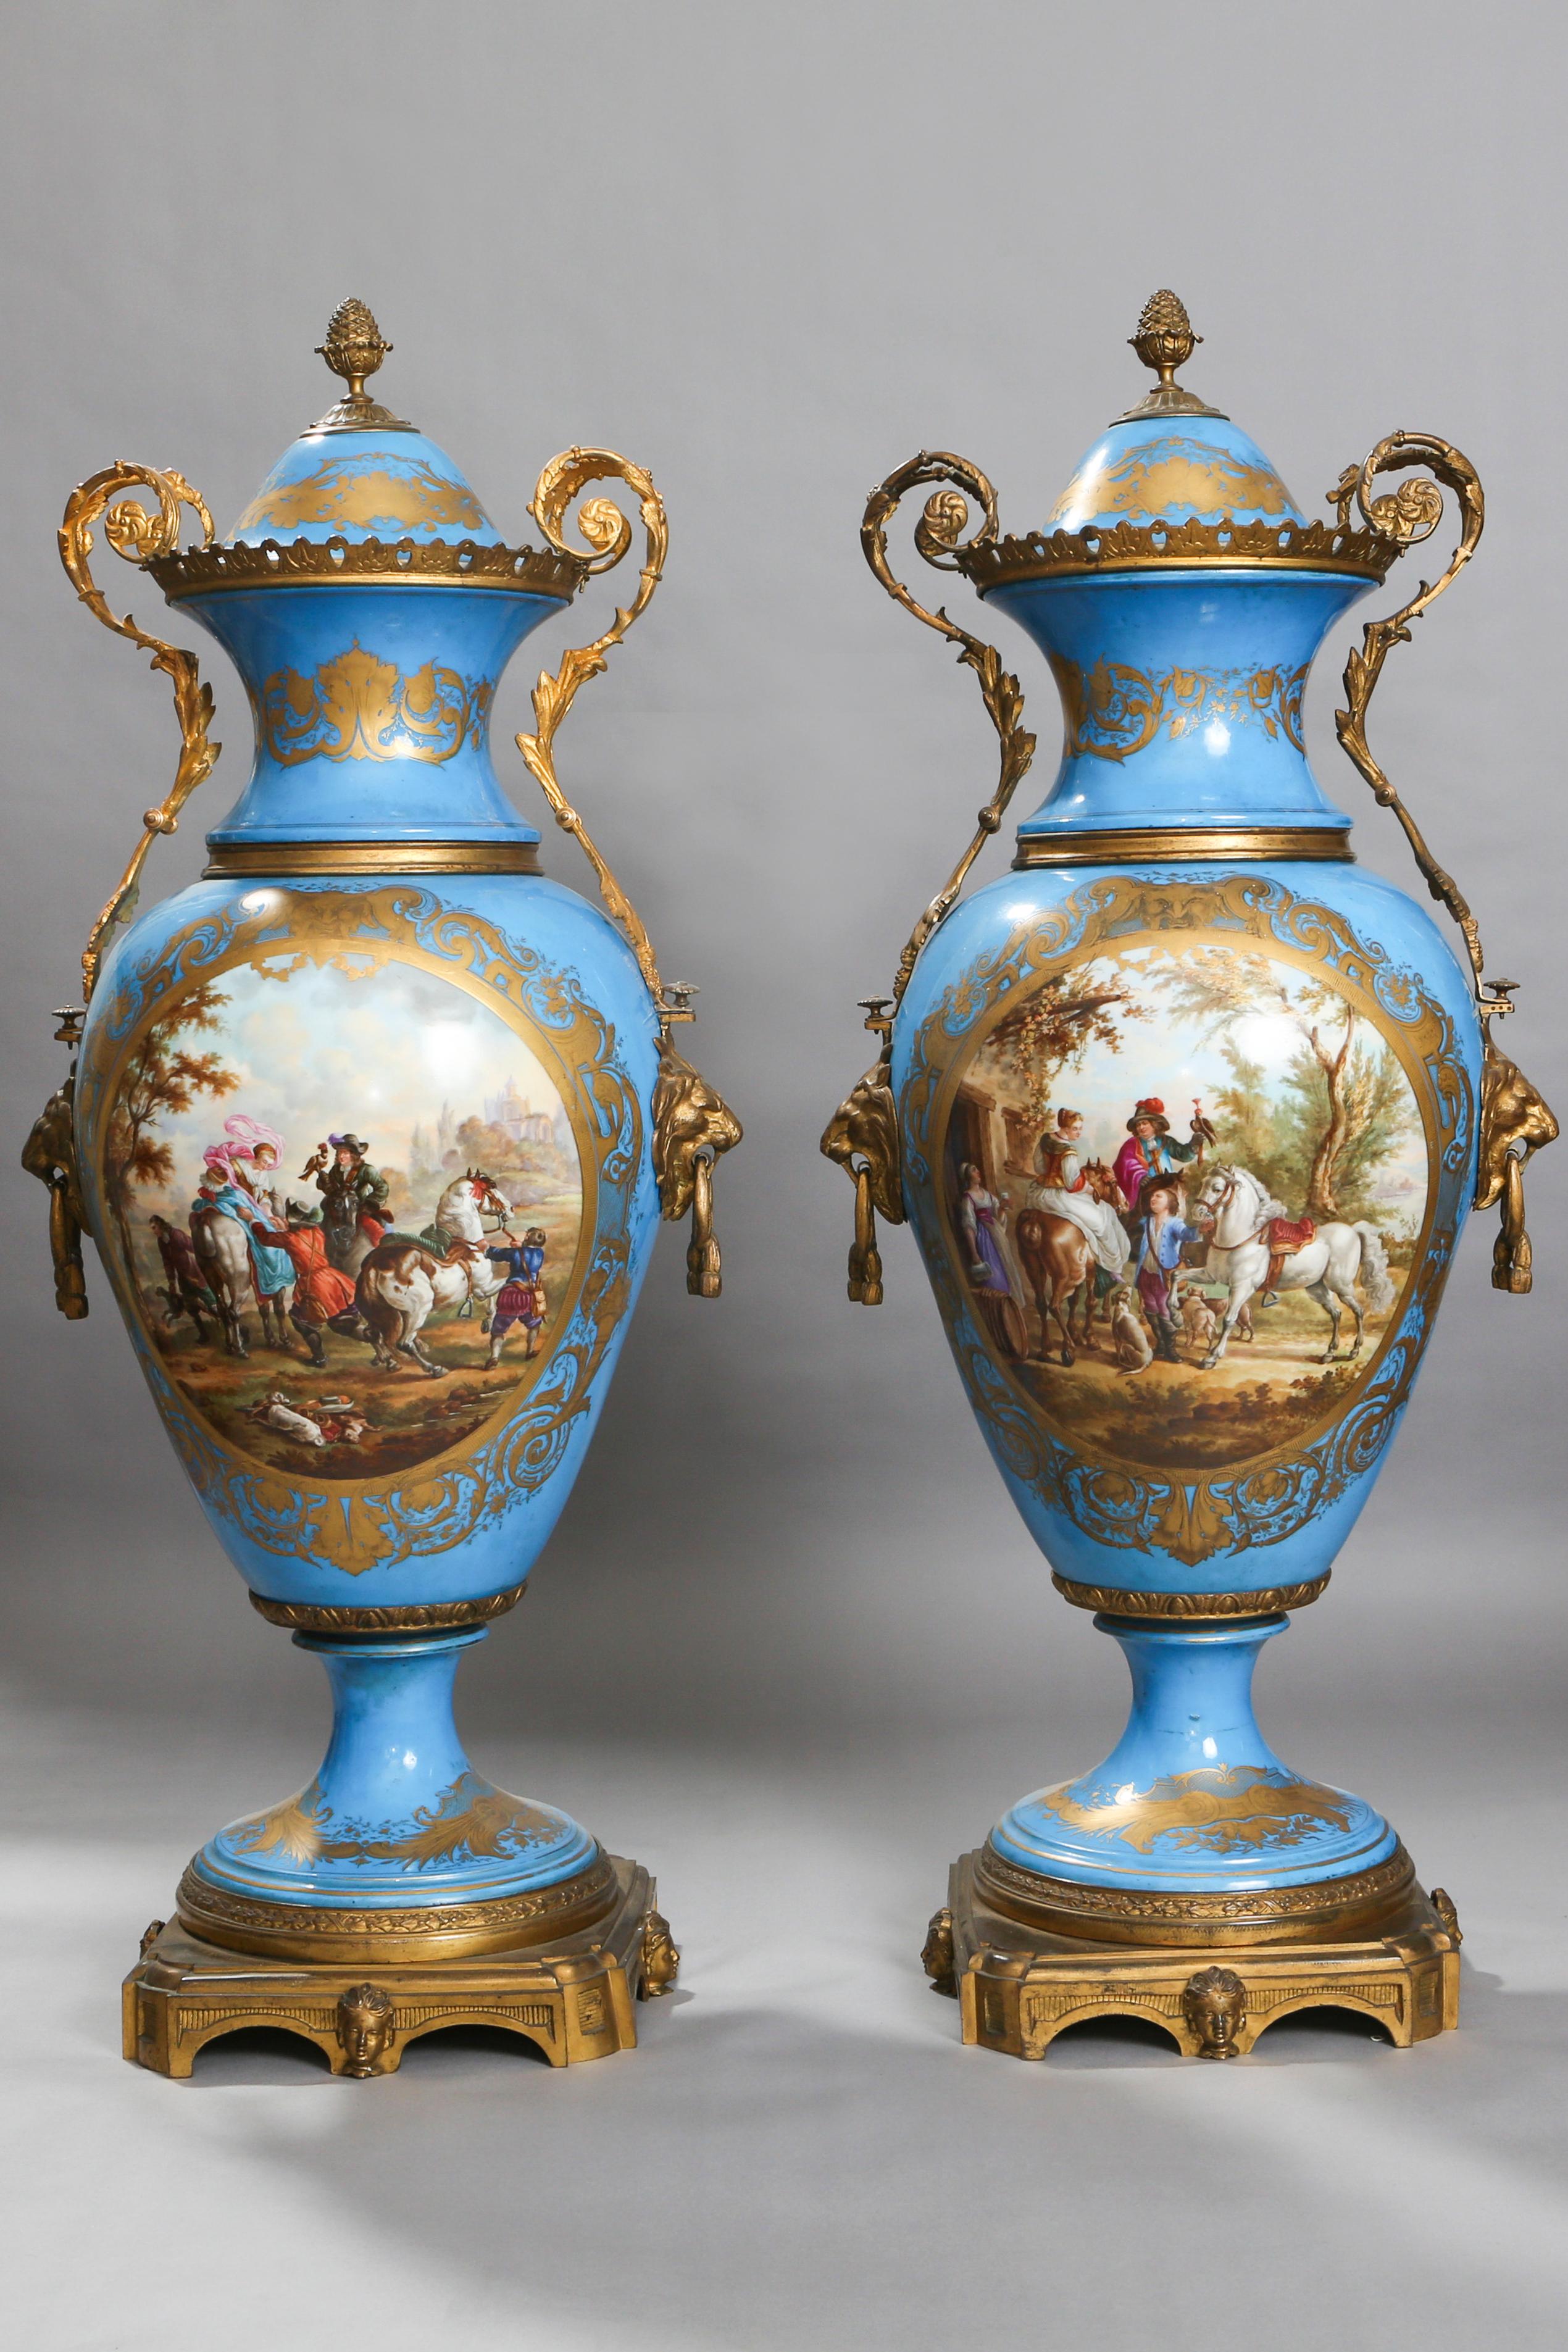 These Classic, light blue background, porcelain vases stand tall on a golden carved octagonal pedestal. Each base is decorated with beautiful gold scrolls and leaves. The painted panel to the front of the vase depicts a 19th century French village